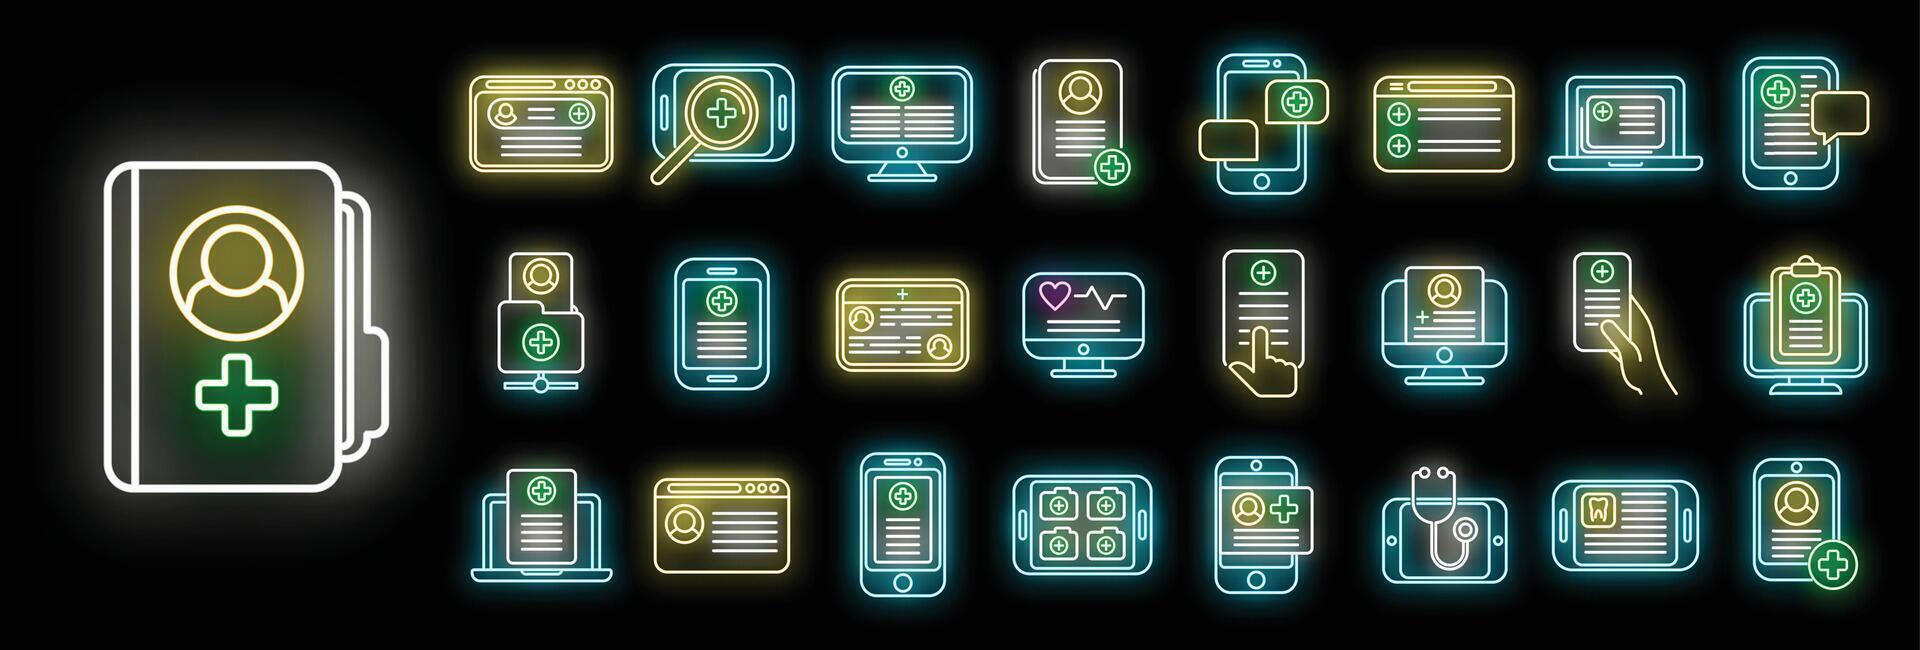 Electronic patient card icons set neon vector